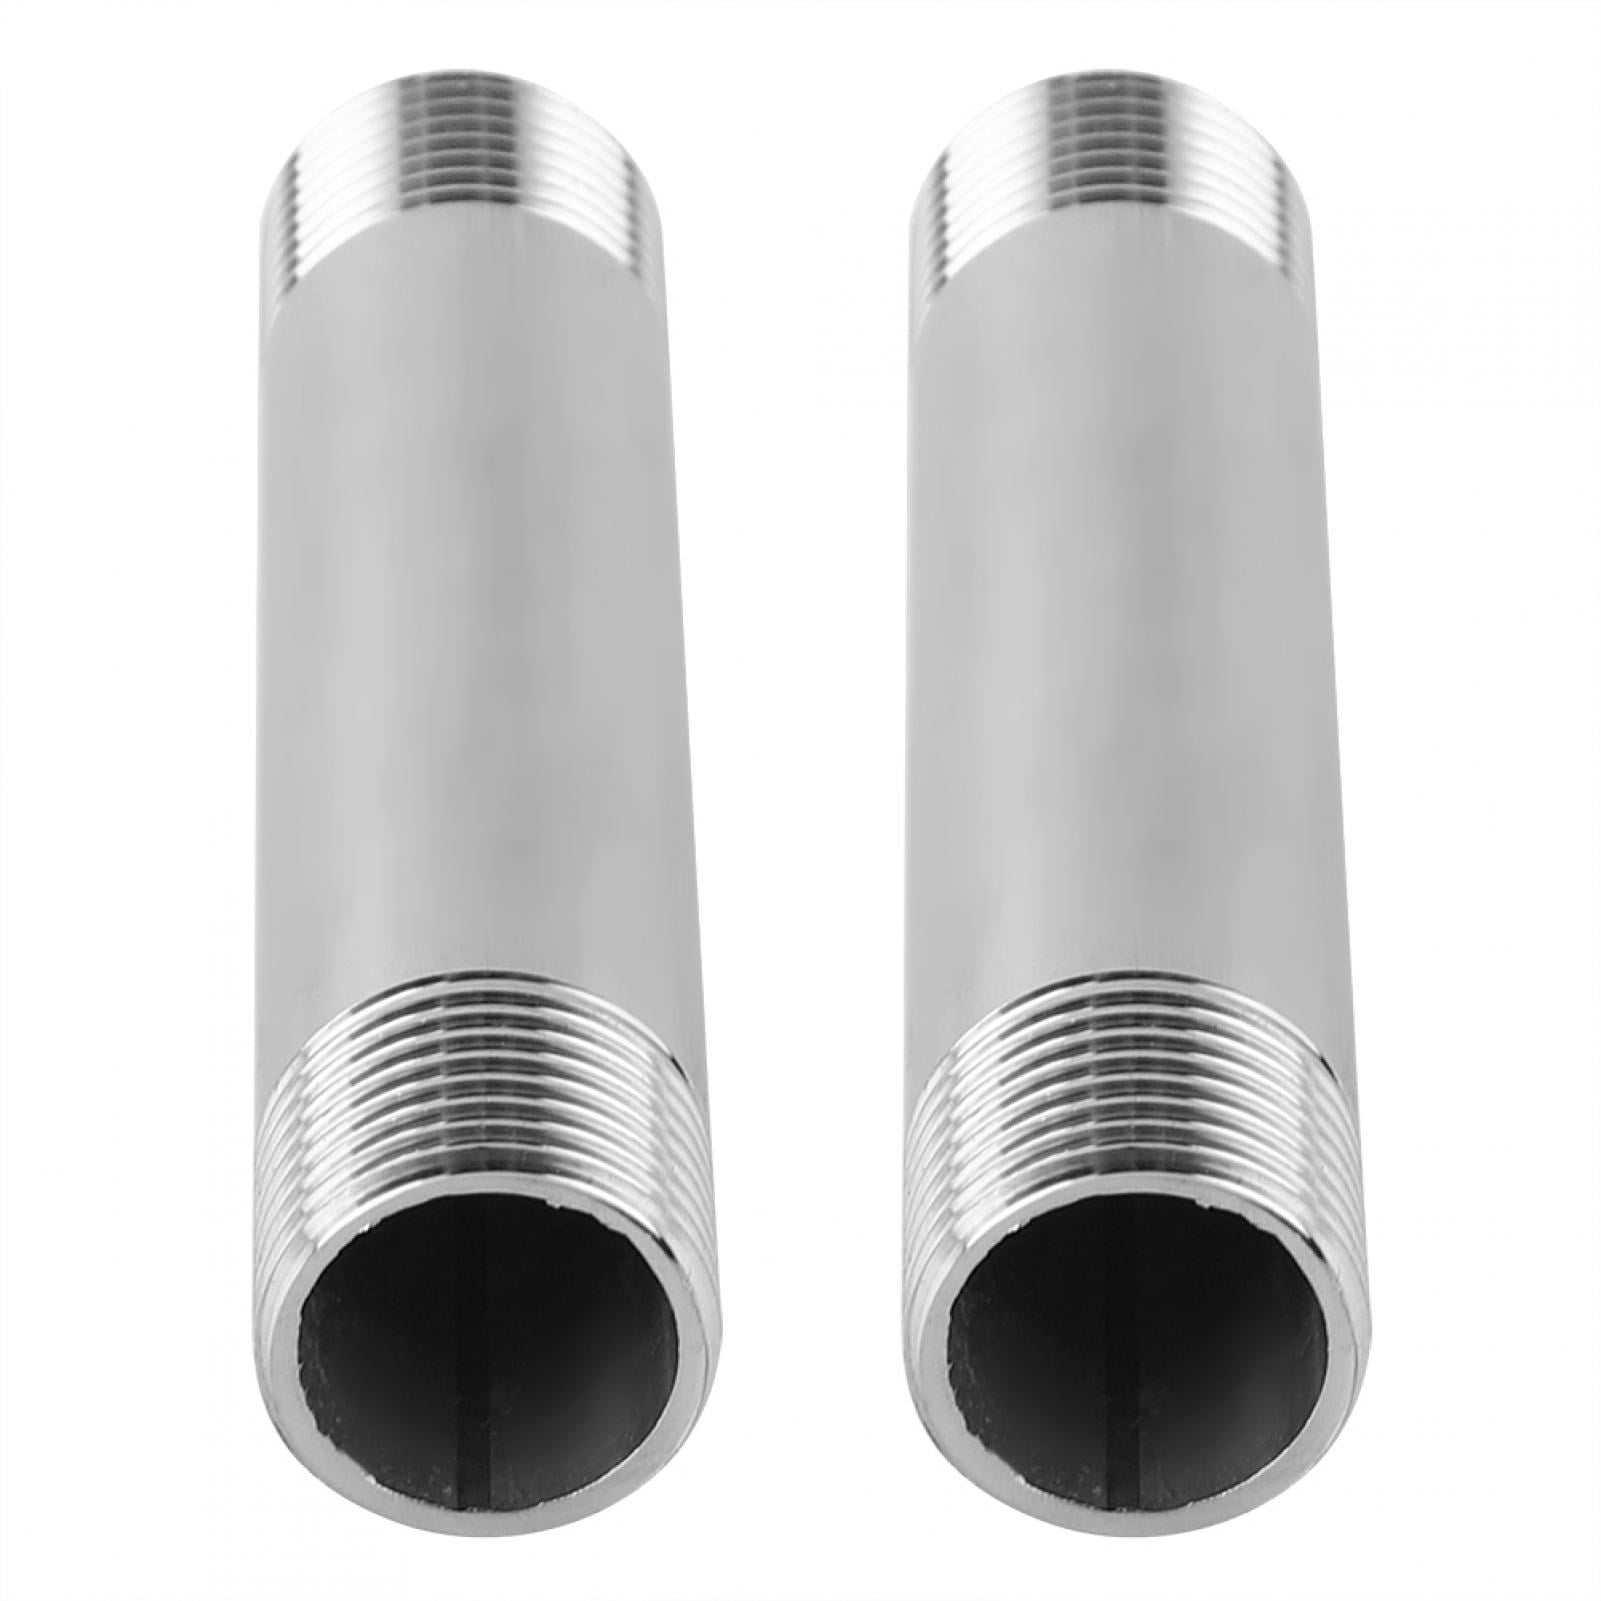 Construction and Pipeline Laying Pipe Connector 4 Points Outer Wire Extension Rod 10cm Liyeehao Plumbing Fittings Male Thread for Plumbing Gas Hardware